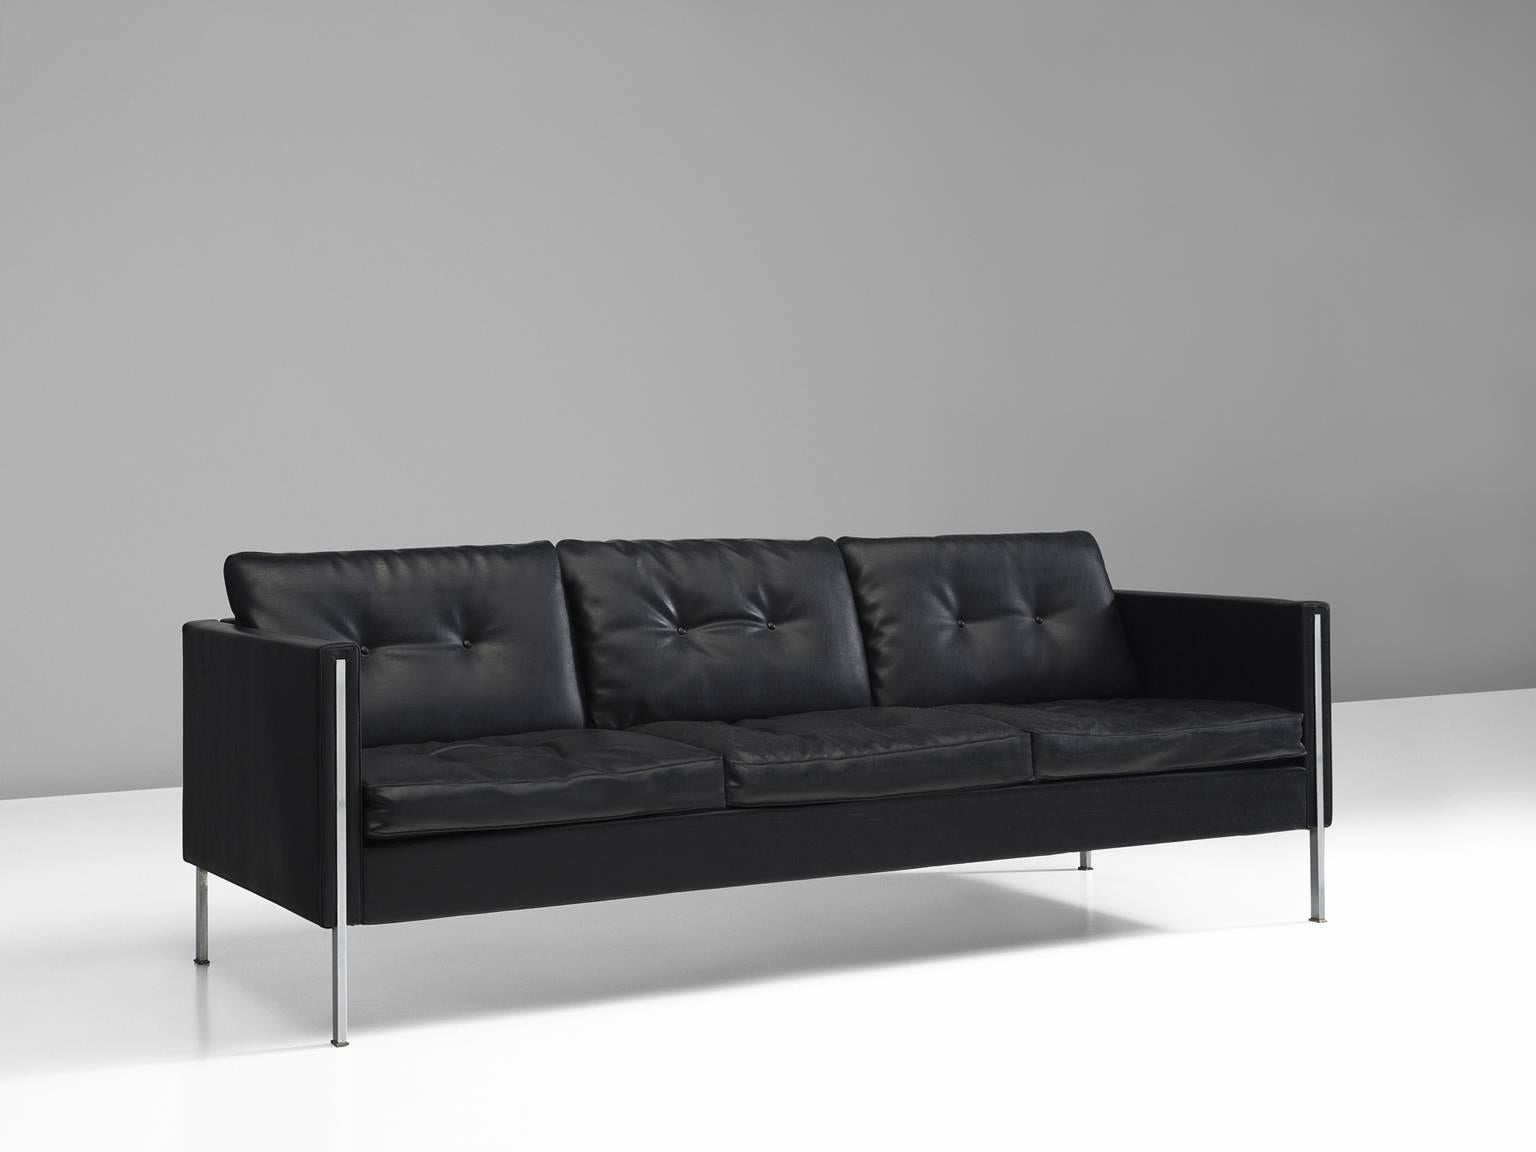 Pierre Paulin for Artifort, sofa model '442/3', leatherette, steel, The Netherlands, 1962. 

This eccentric three-seat sofa is based on a solid construction featuring clear lines and geometrical shapes executed in a subtle way. The seat is supported